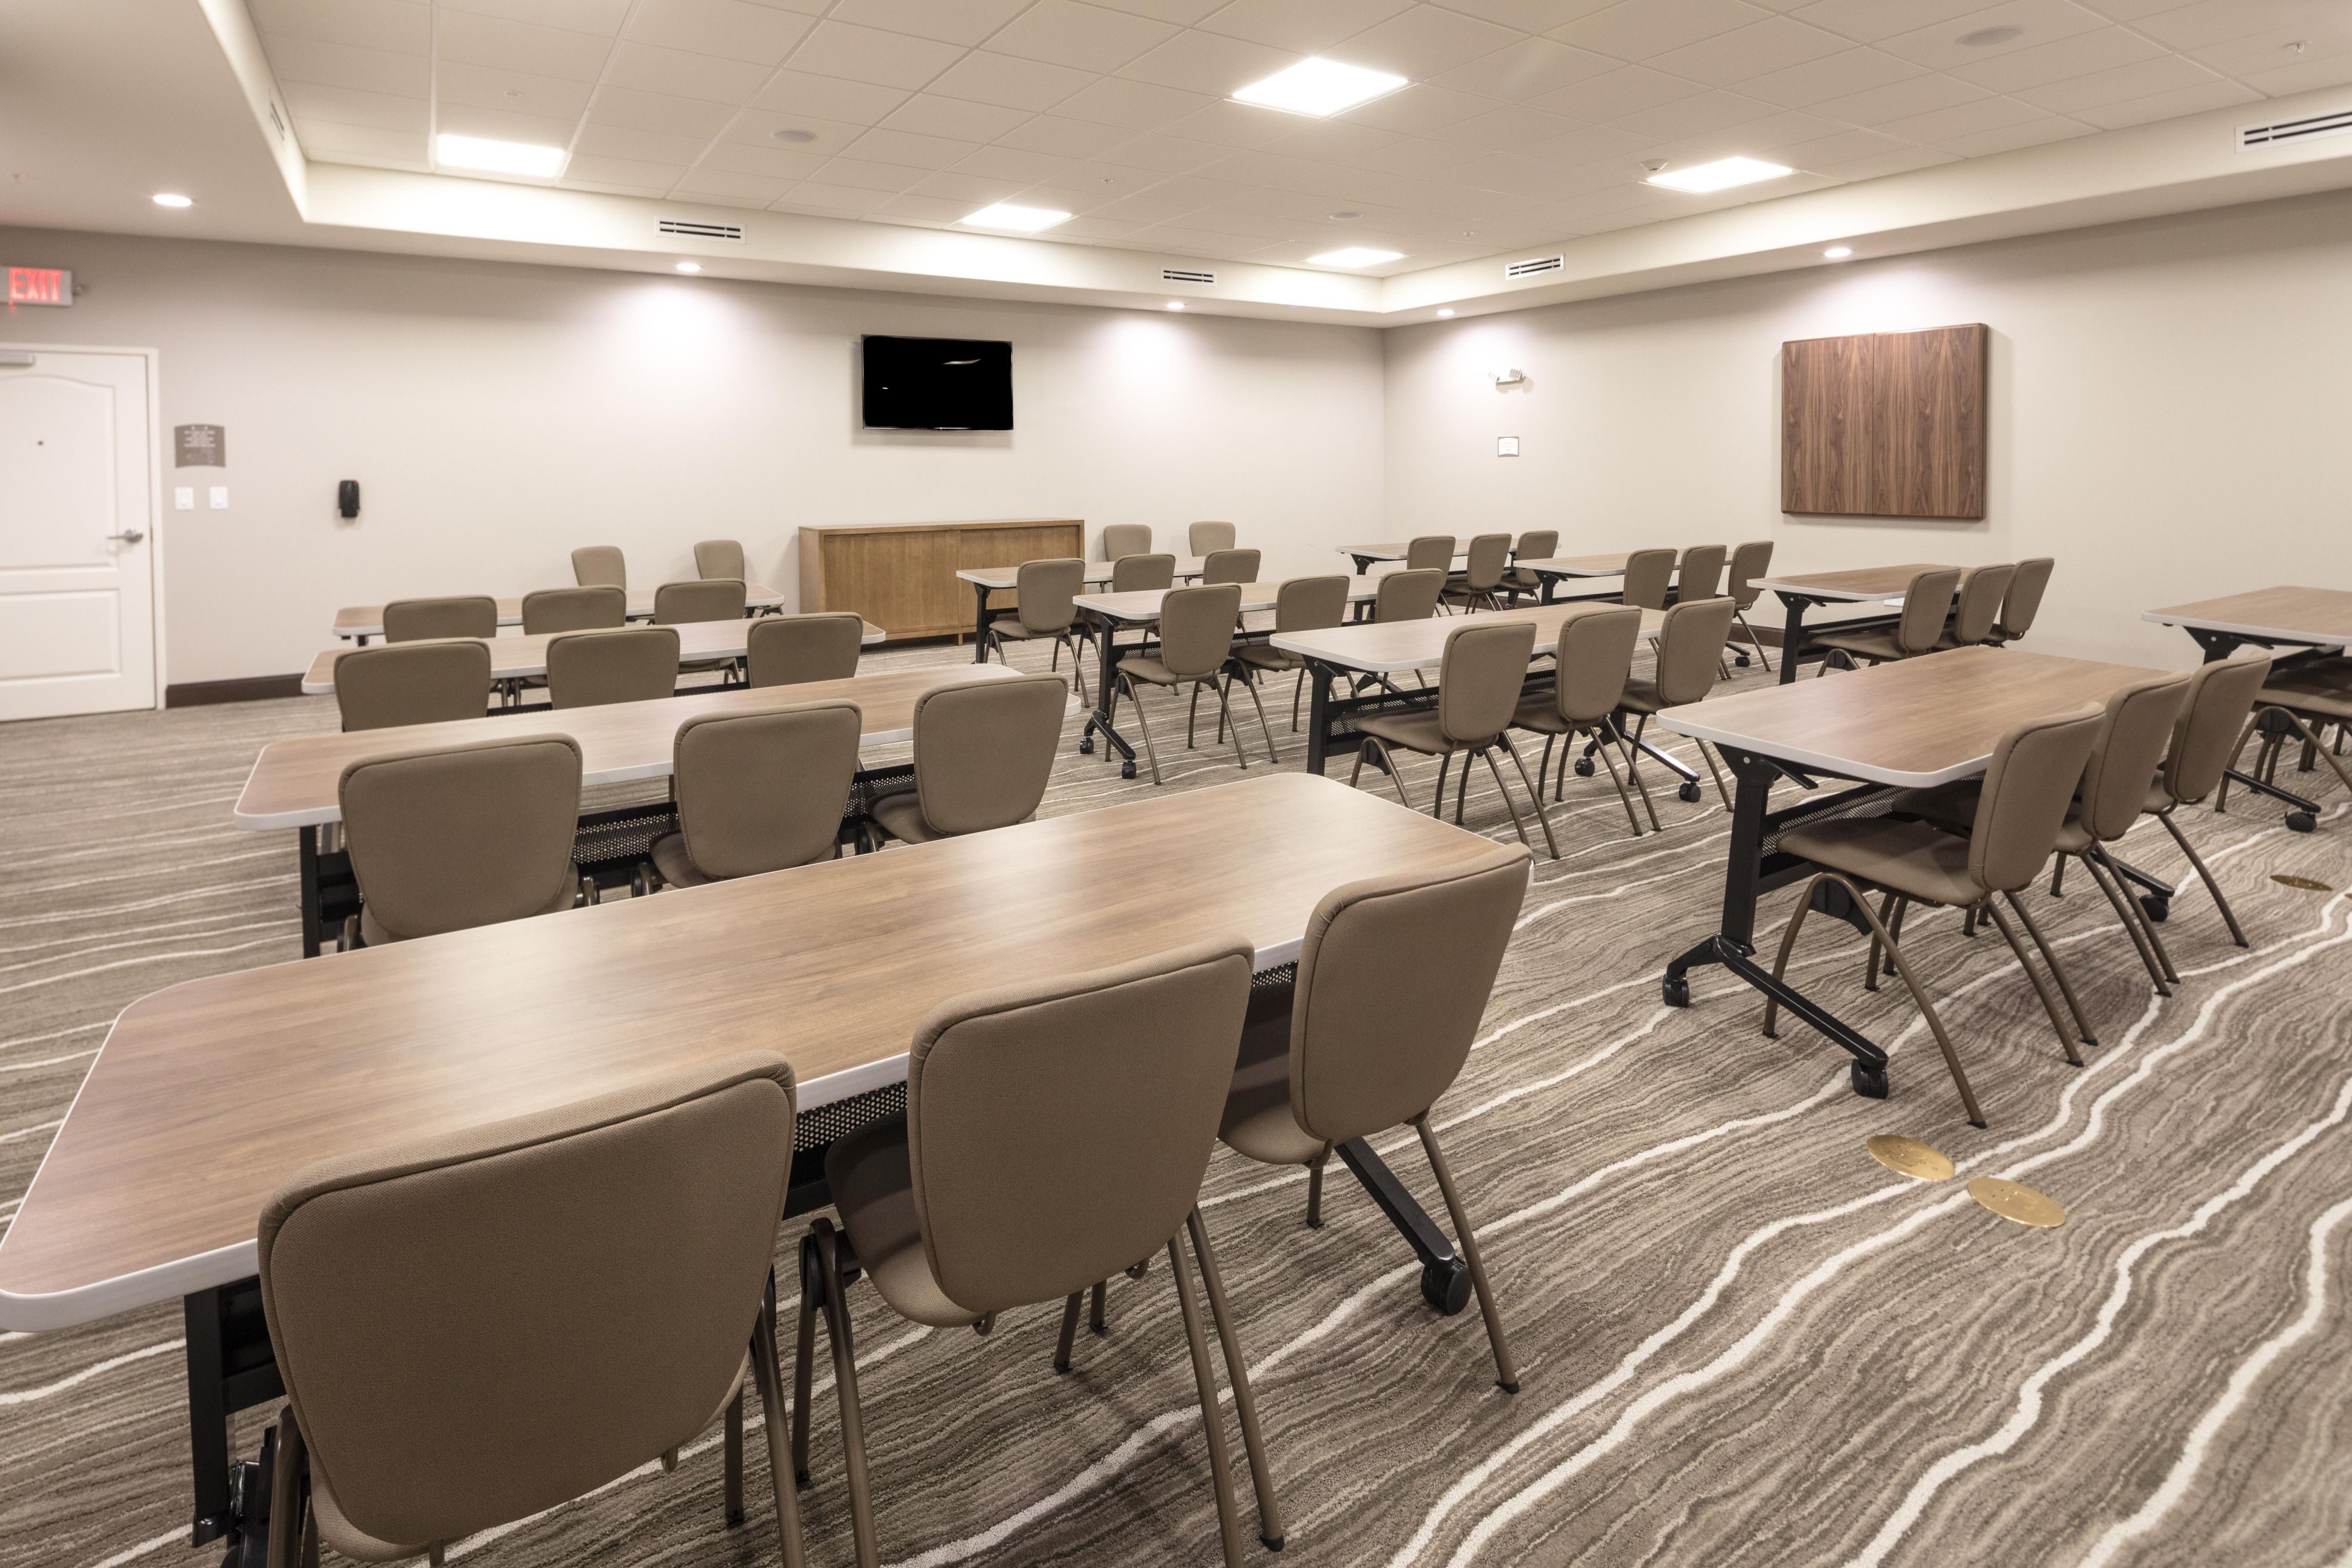 Enjoy one of our onsite meeting spaces.  Call 979-285-9775 or stop by hotel front desk for any inquiry.